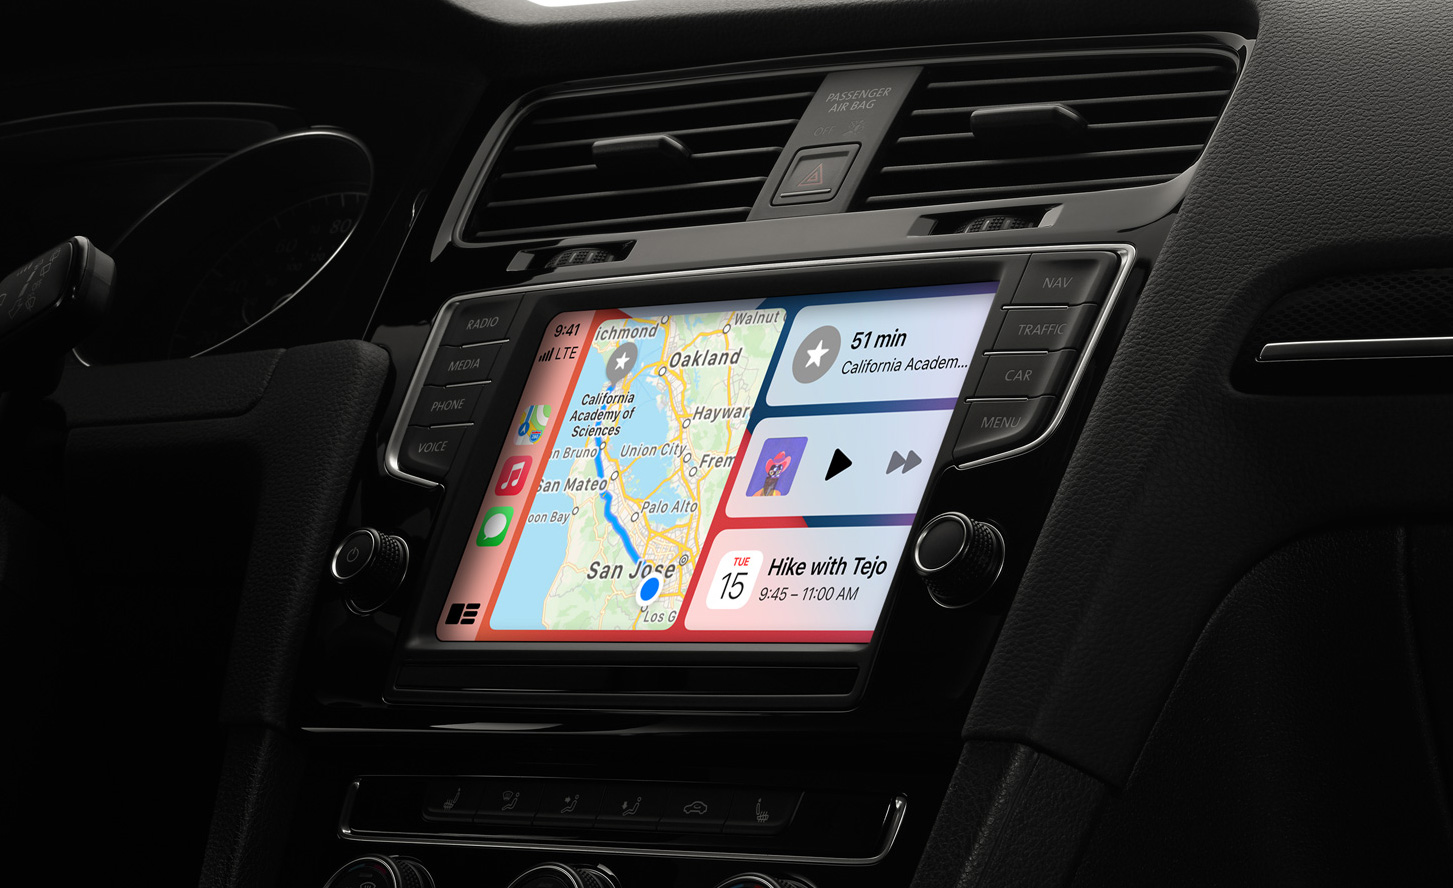 Apple touts 800 vehicles feature CarPlay as GM says it is abandoning support